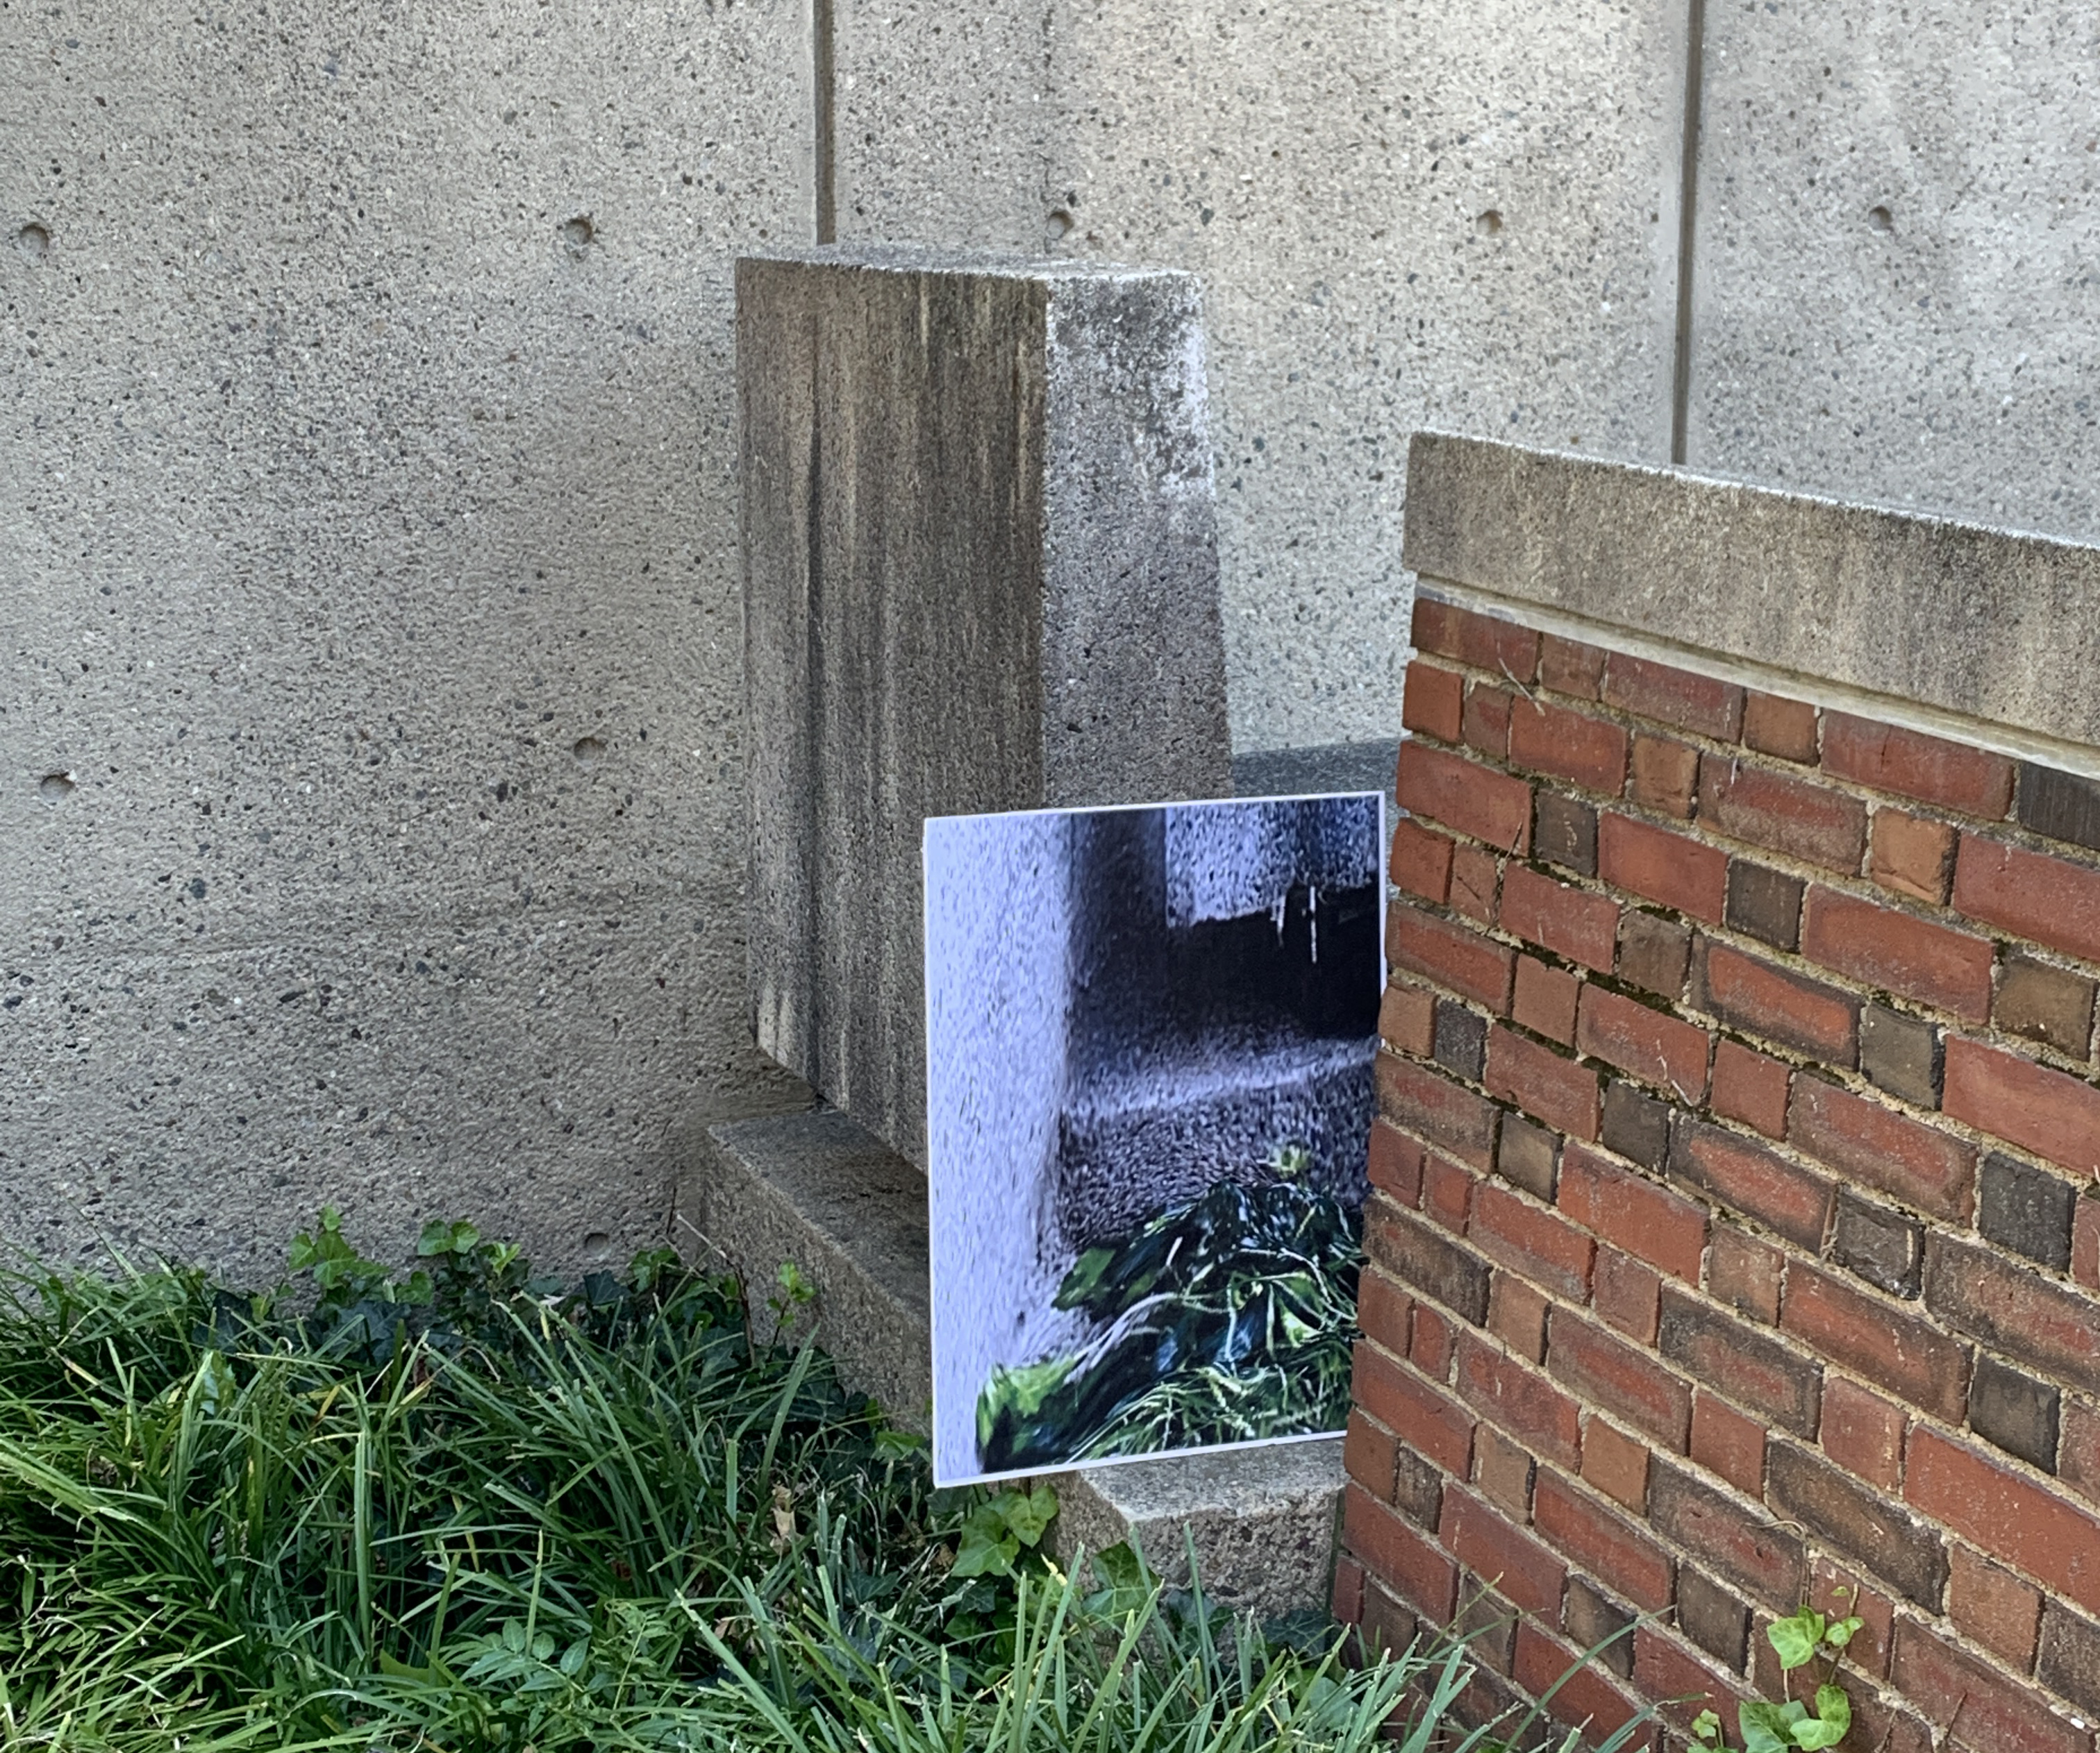 photogrammetric image contrasting concrete with plant life